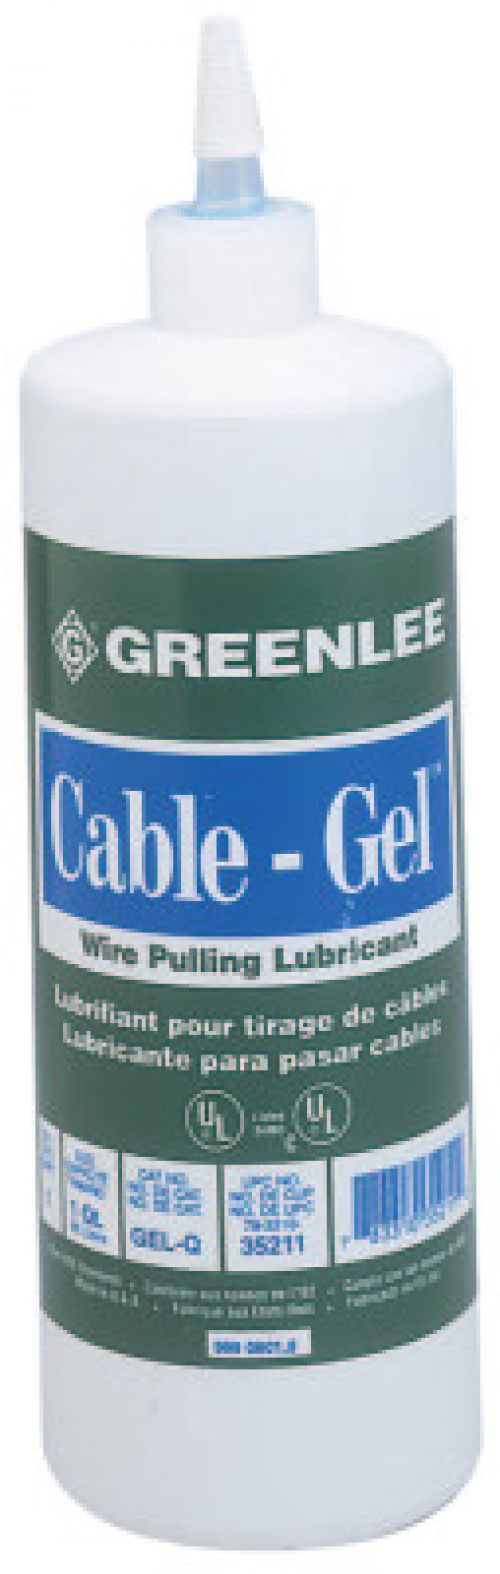 Cable-Gel Cable Pulling Lubricants, 1 qt Squeeze Bottle